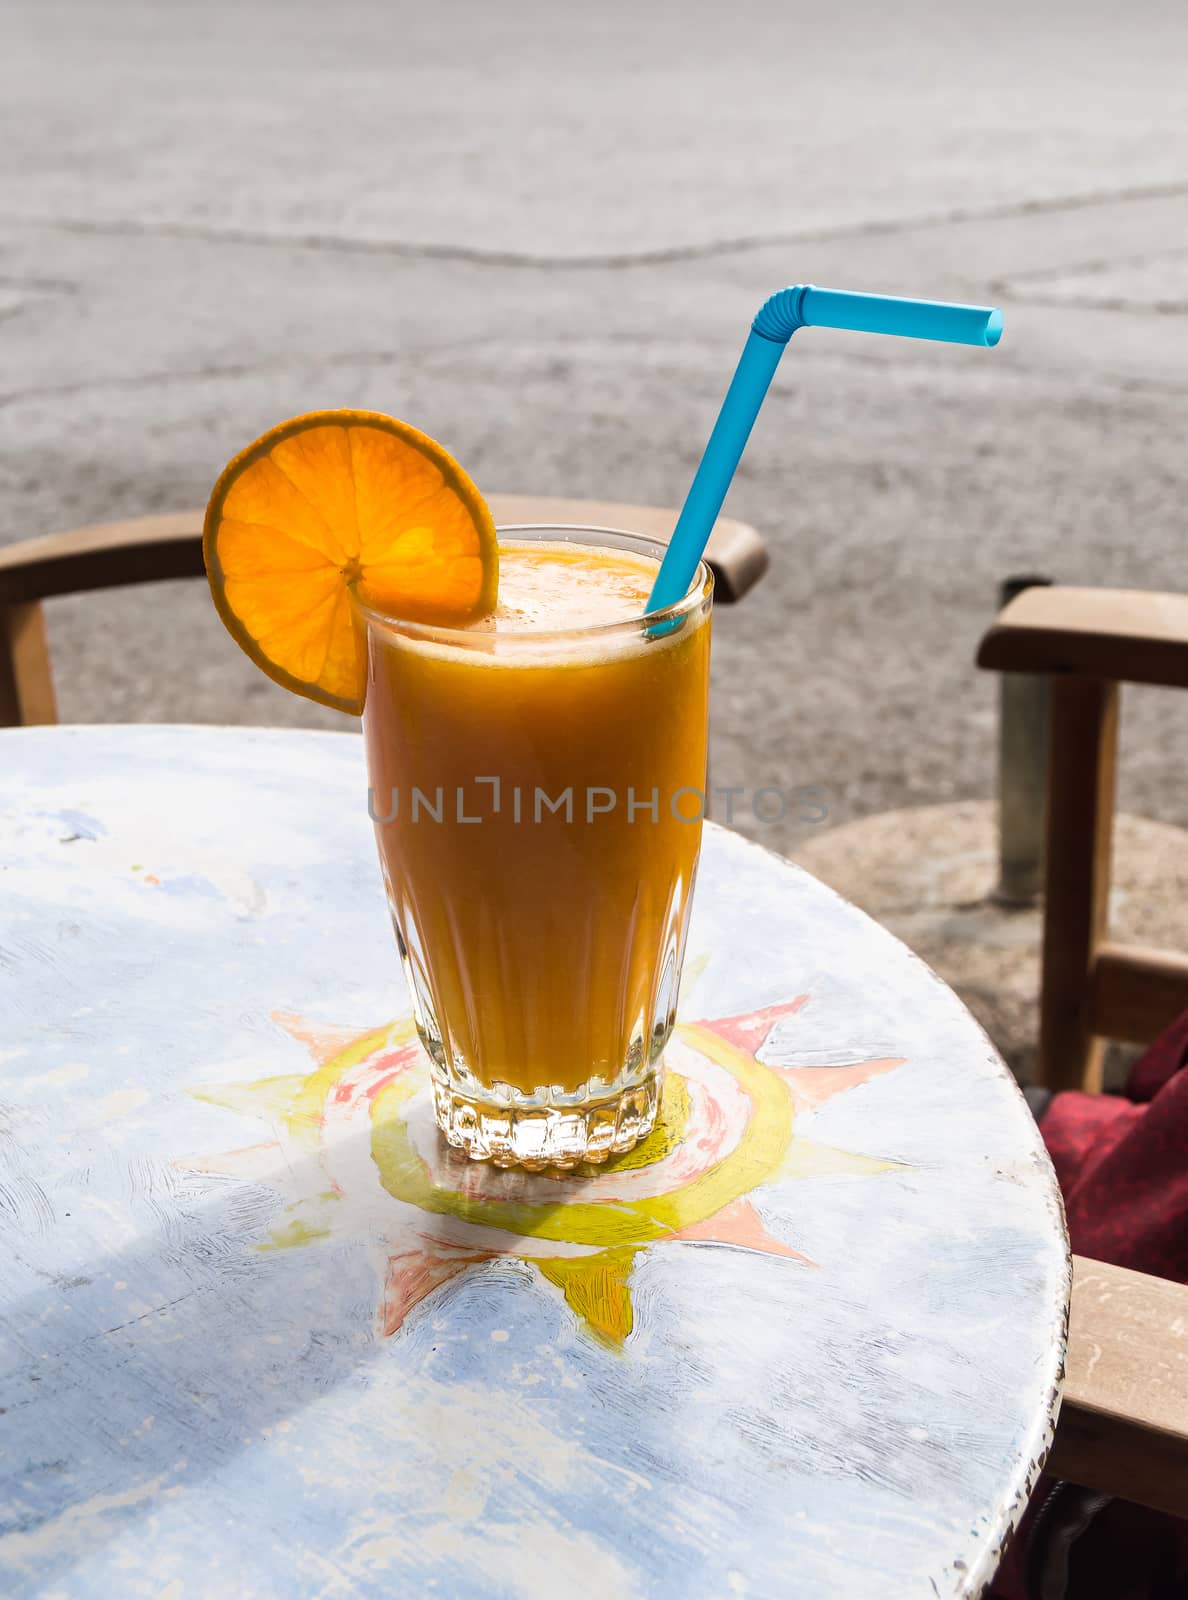 Orange juice smoothie drink with a slice of orange and a blue straw lay on a round table with the sun as a motive